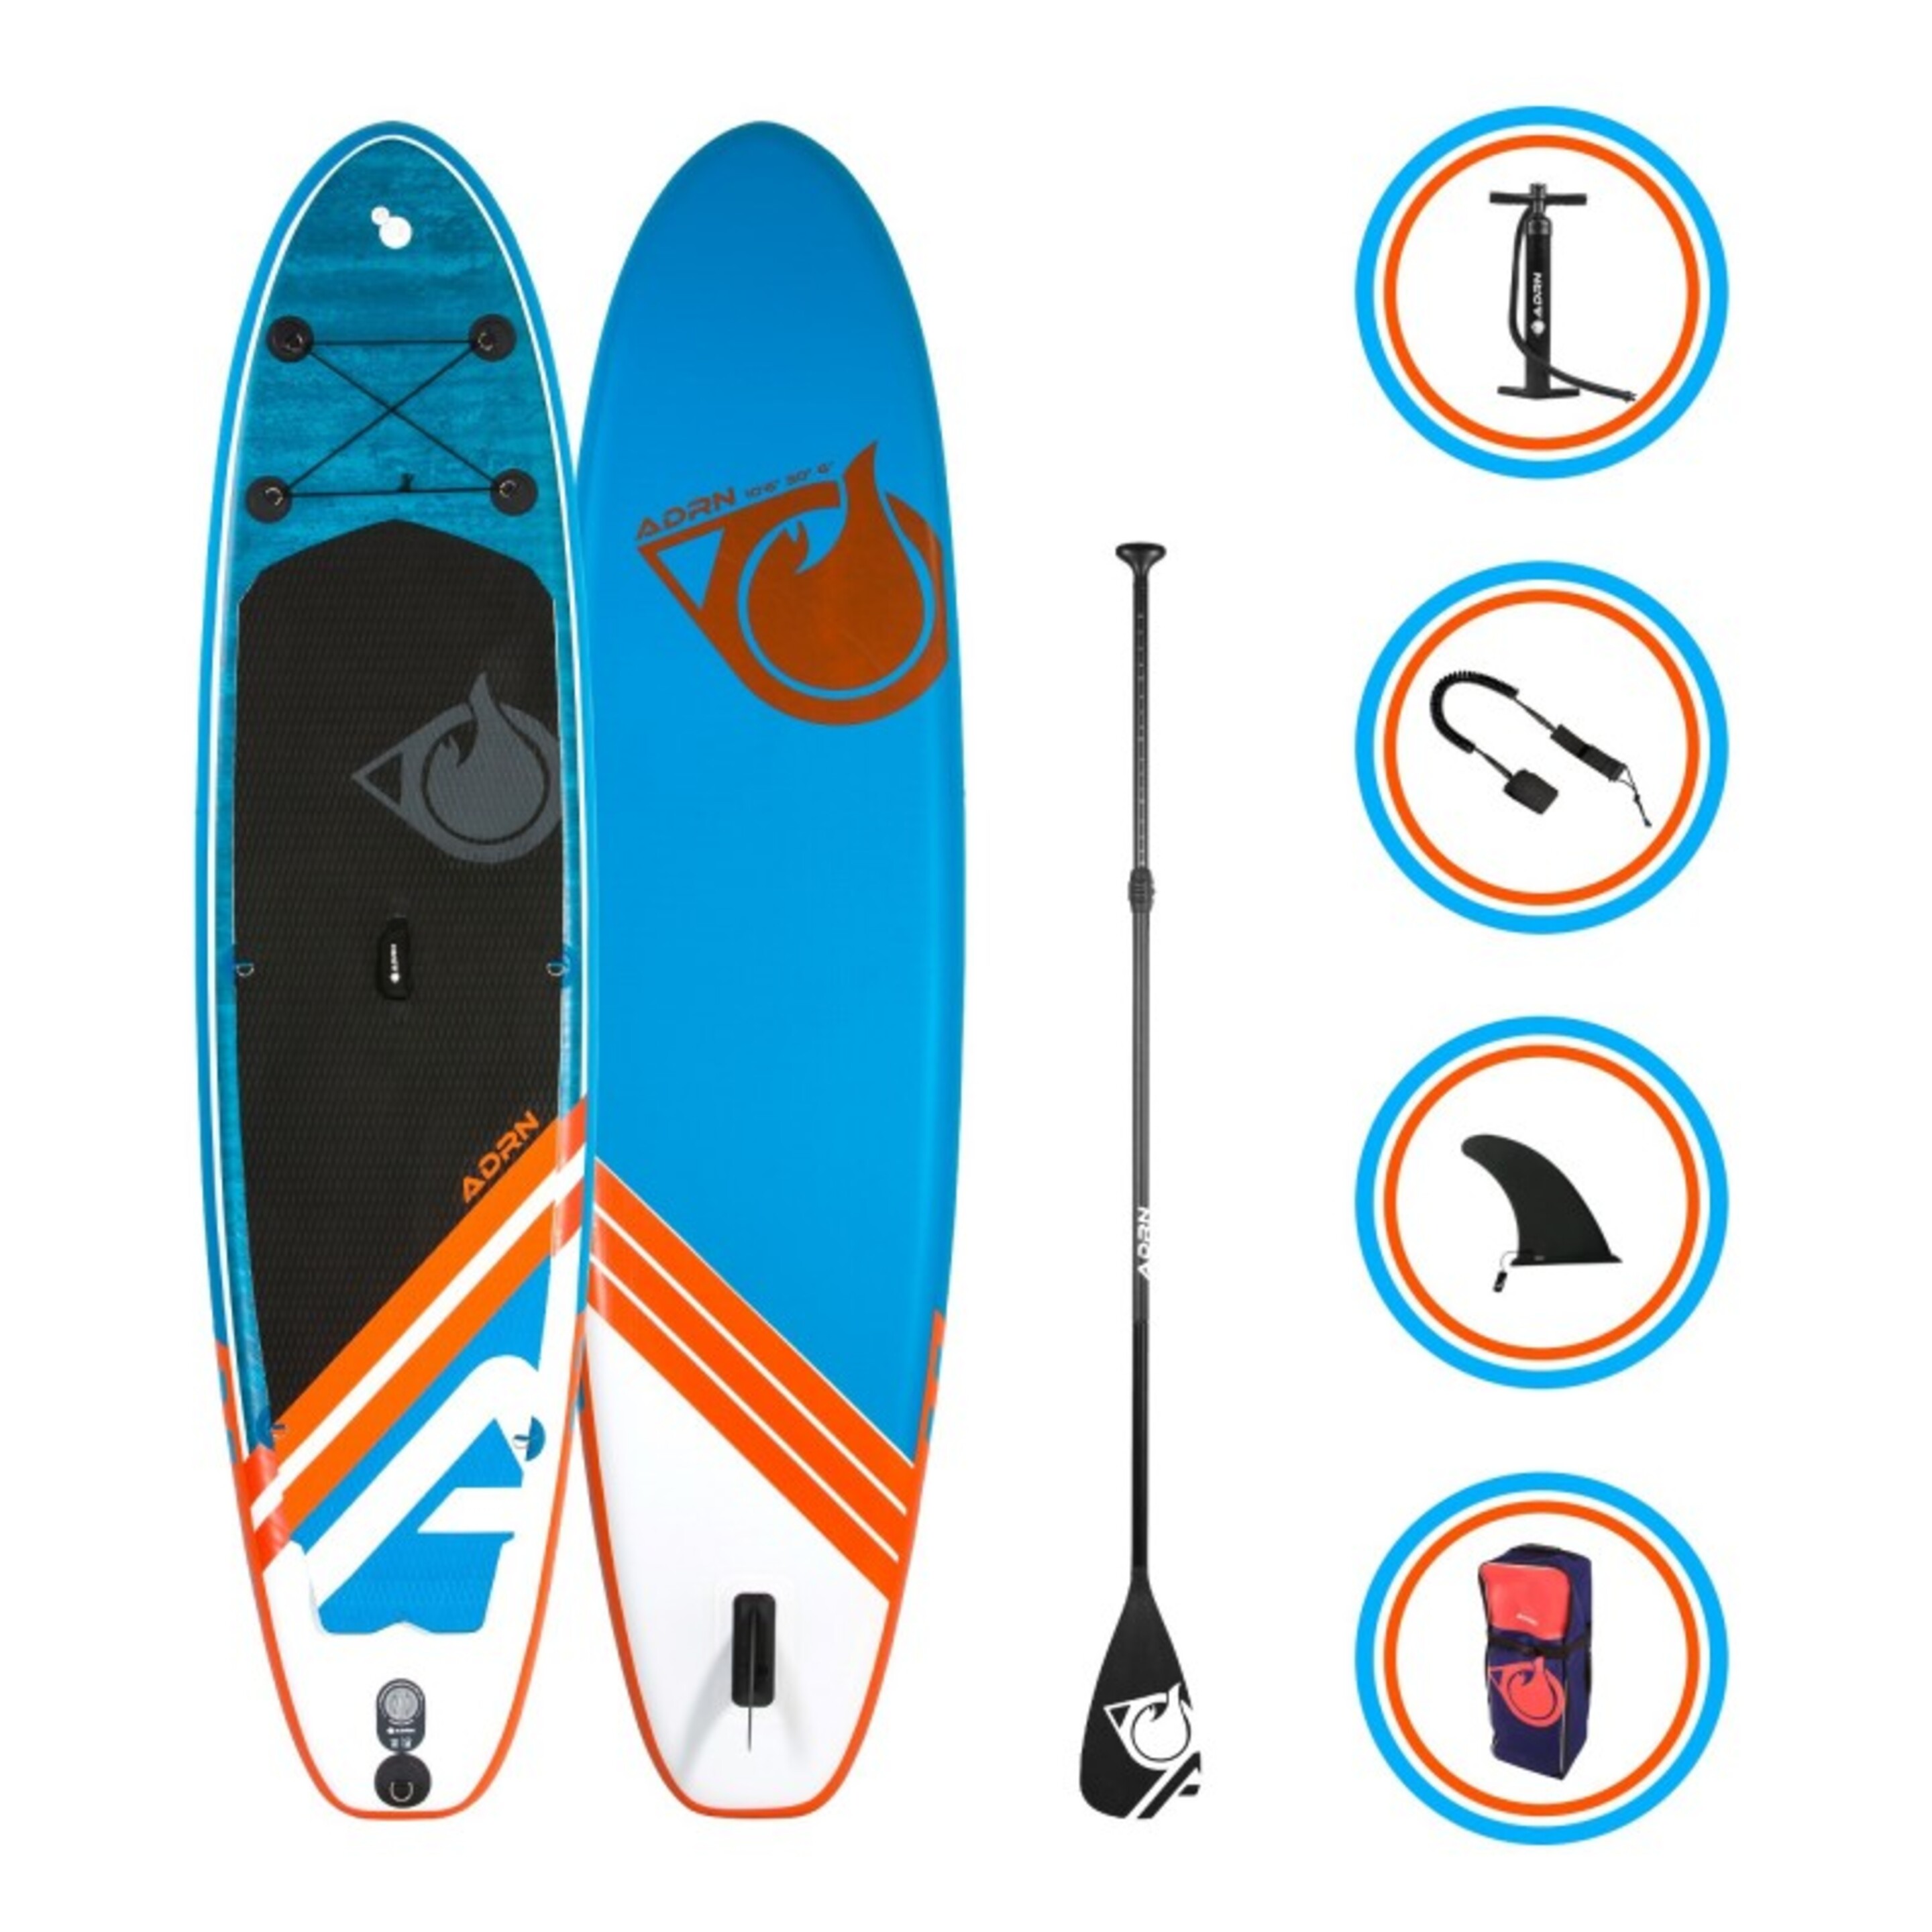 Paddle Hinchable Liner 10'6 + Accesorios 320 X 76 X 15 Cm - Azul - Paddle Surf  MKP